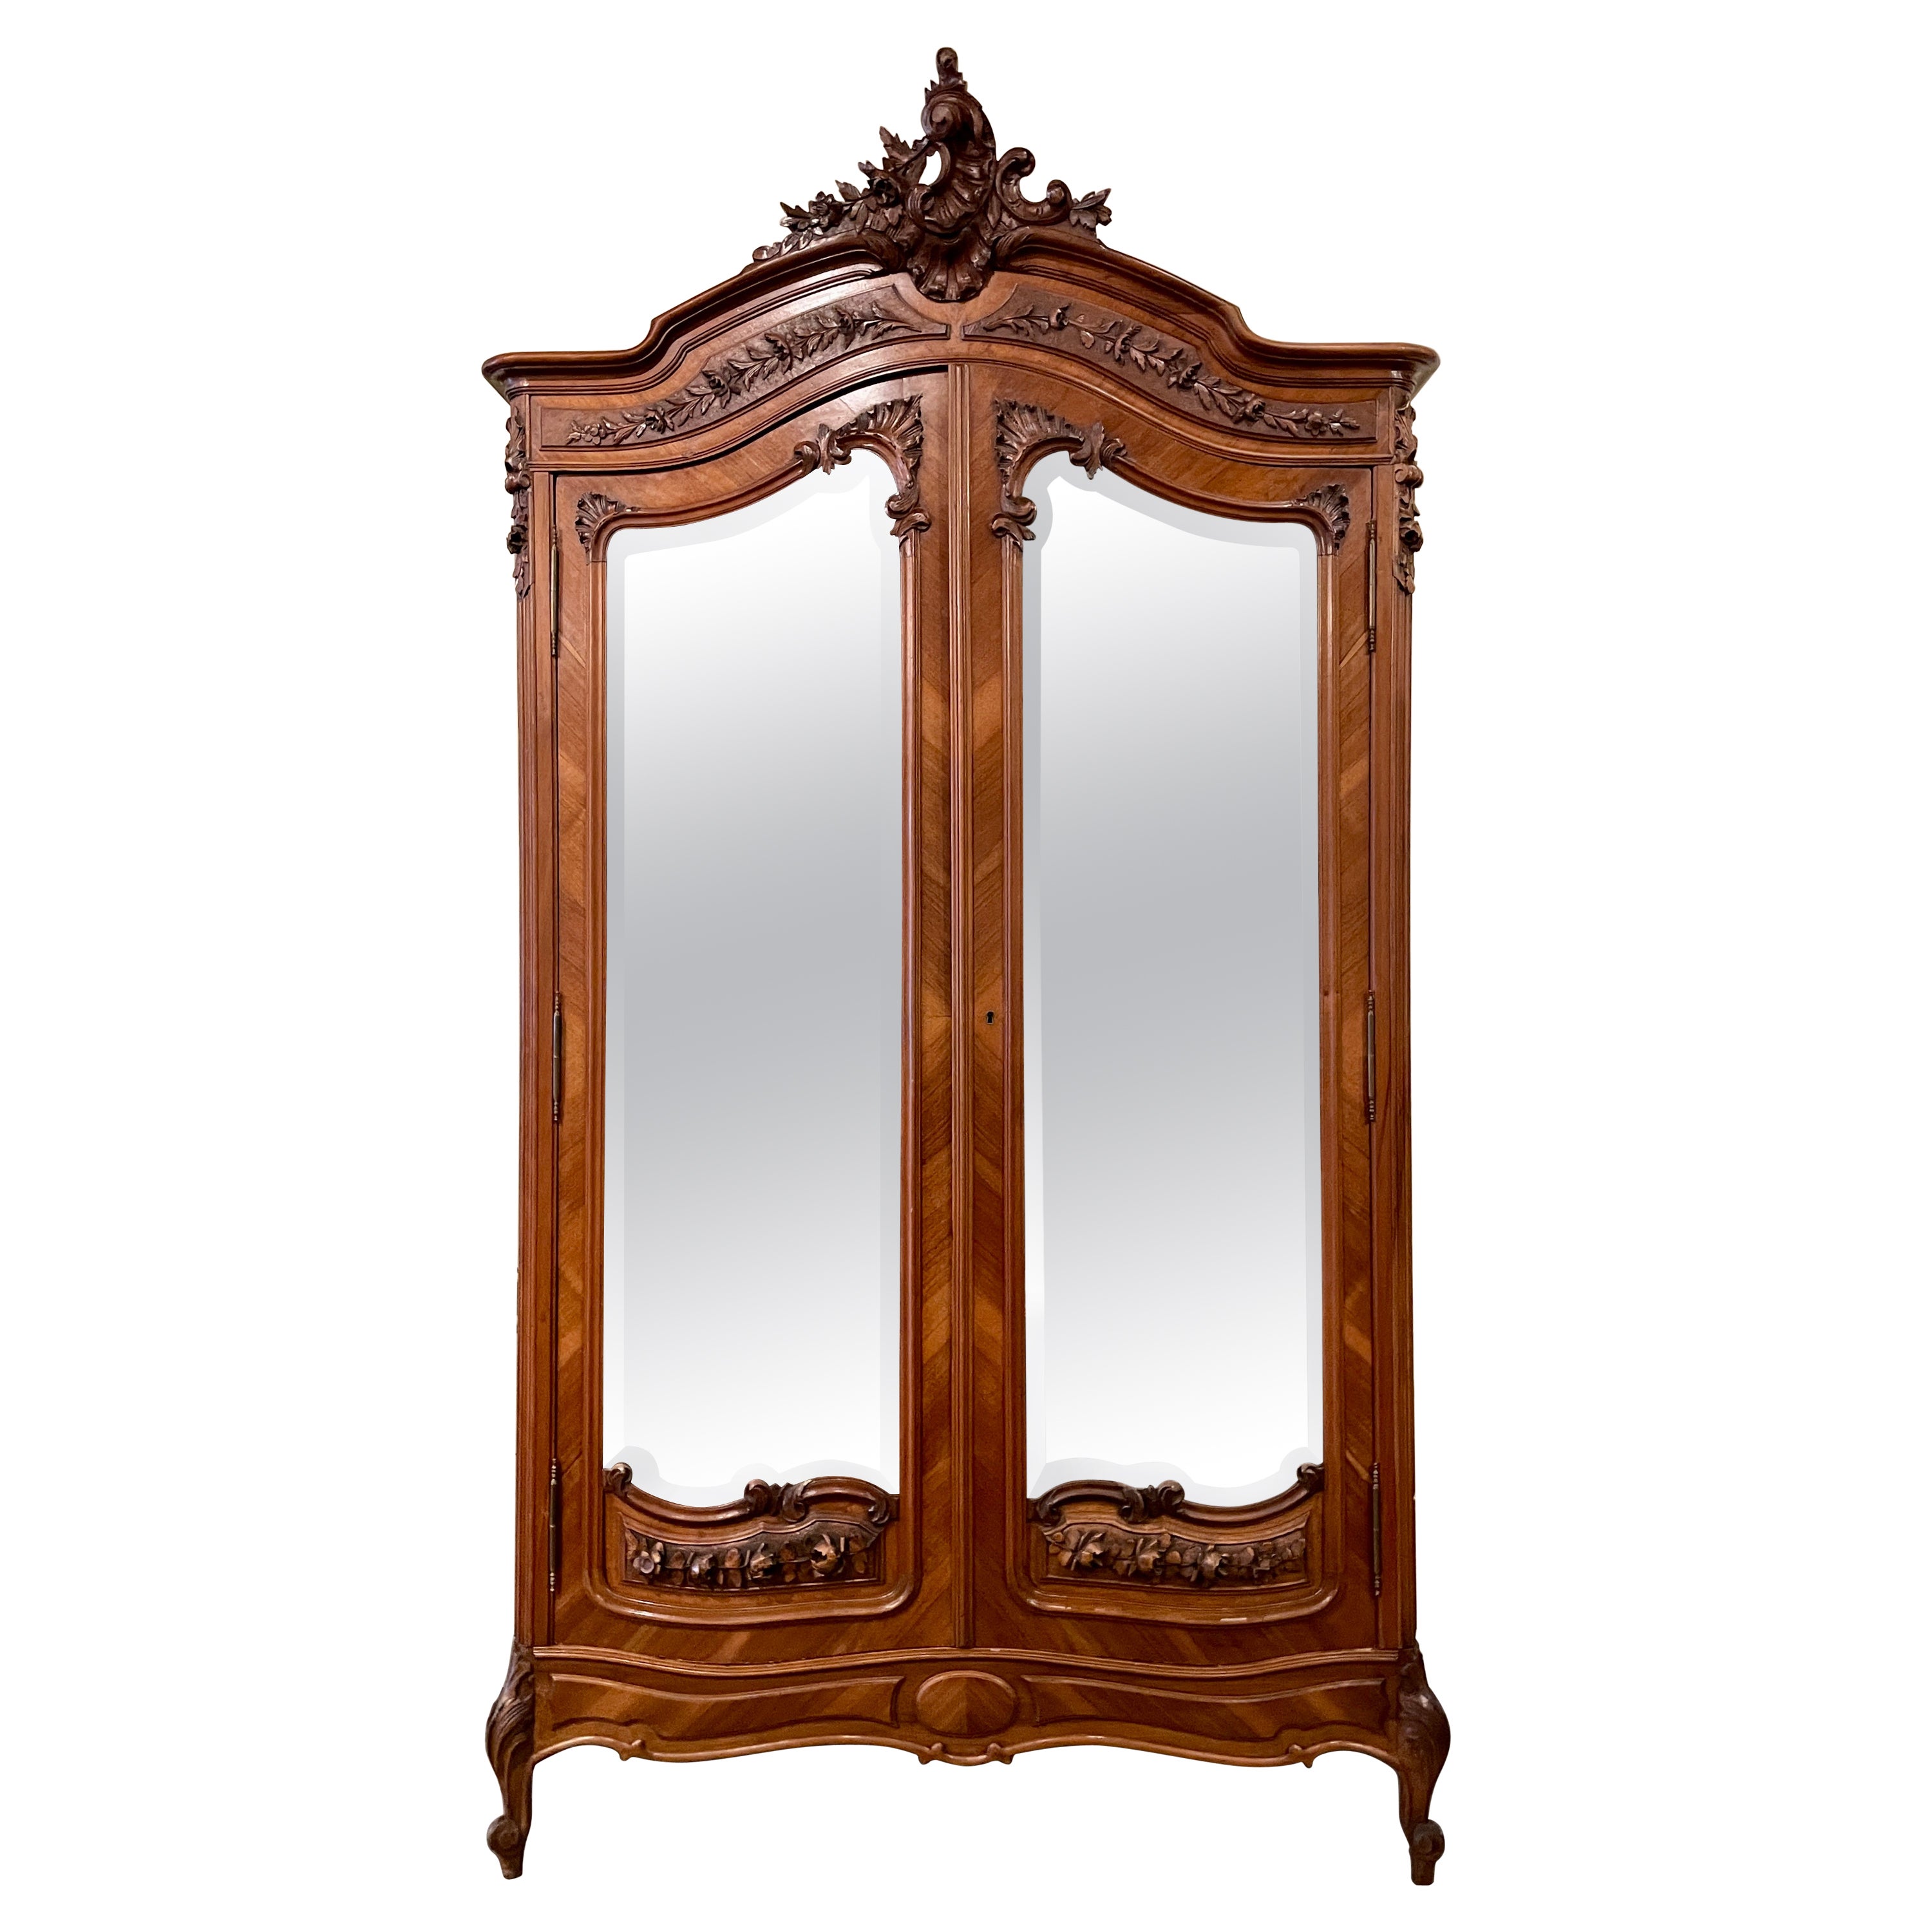 Antique French Carved Walnut Double Door Armoire with Beveled Mirrors circa 1890